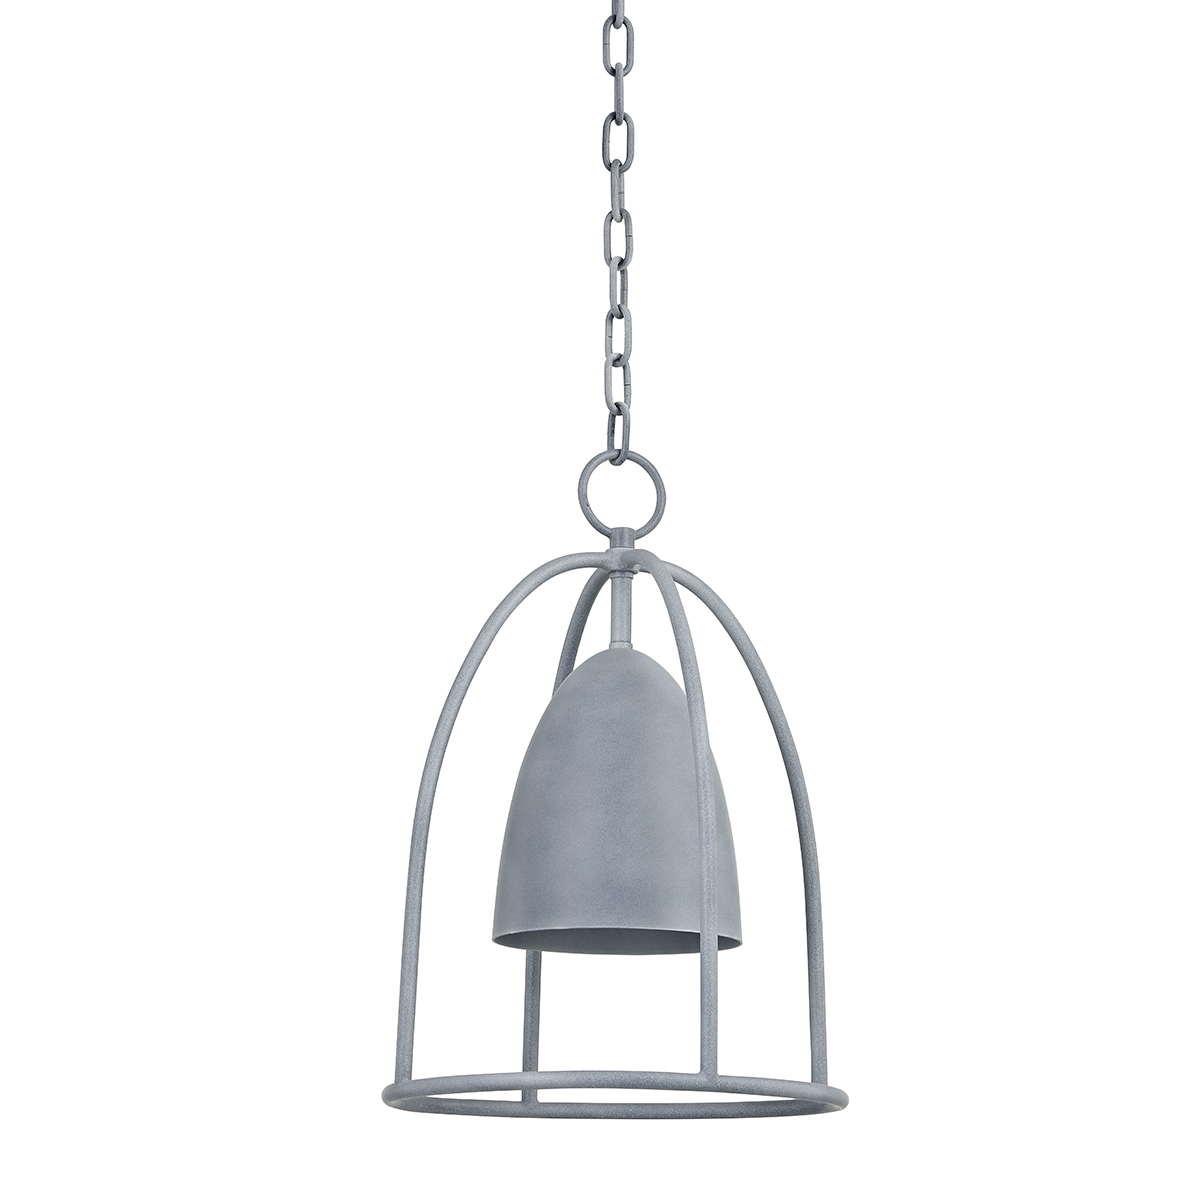 Troy Lighting 1 LIGHT SMALL EXTERIOR LANTERN F1116 Outdoor l Wall Troy Lighting WEATHERED ZINC  